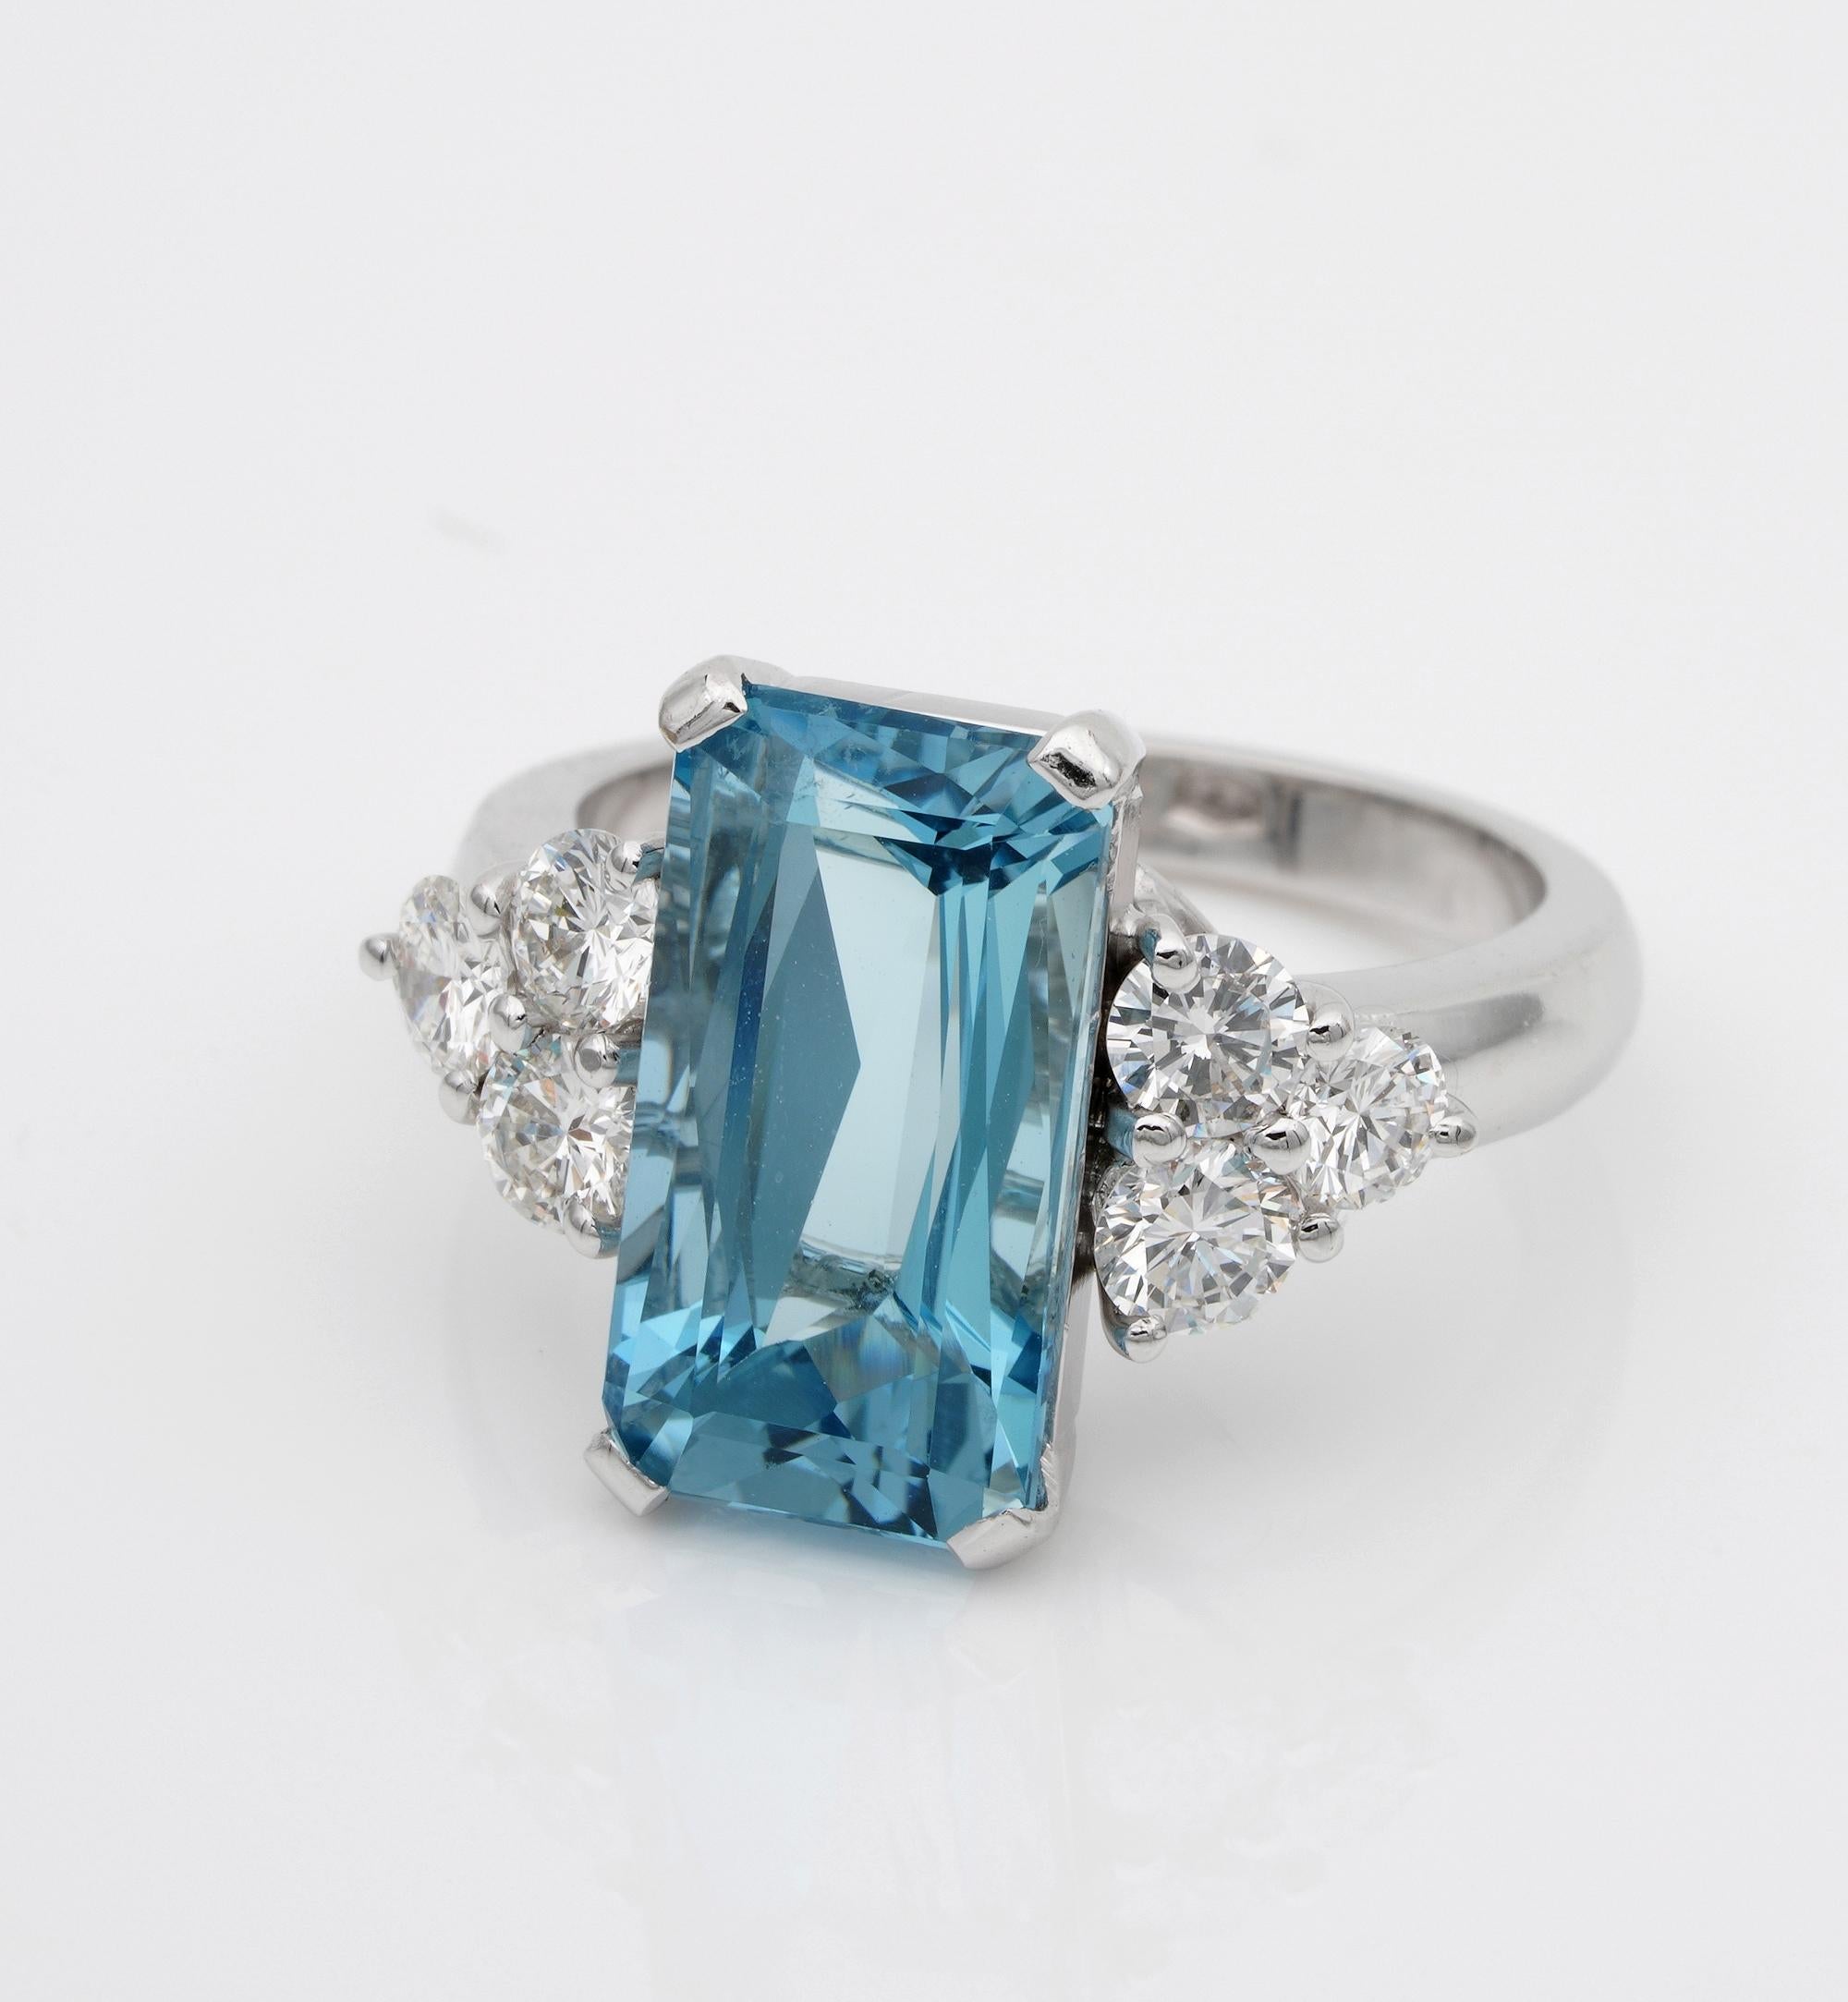 Magnificent 4.70 Carat Aquamarine and Diamond High Quality Engagement Ring In Good Condition For Sale In Napoli, IT